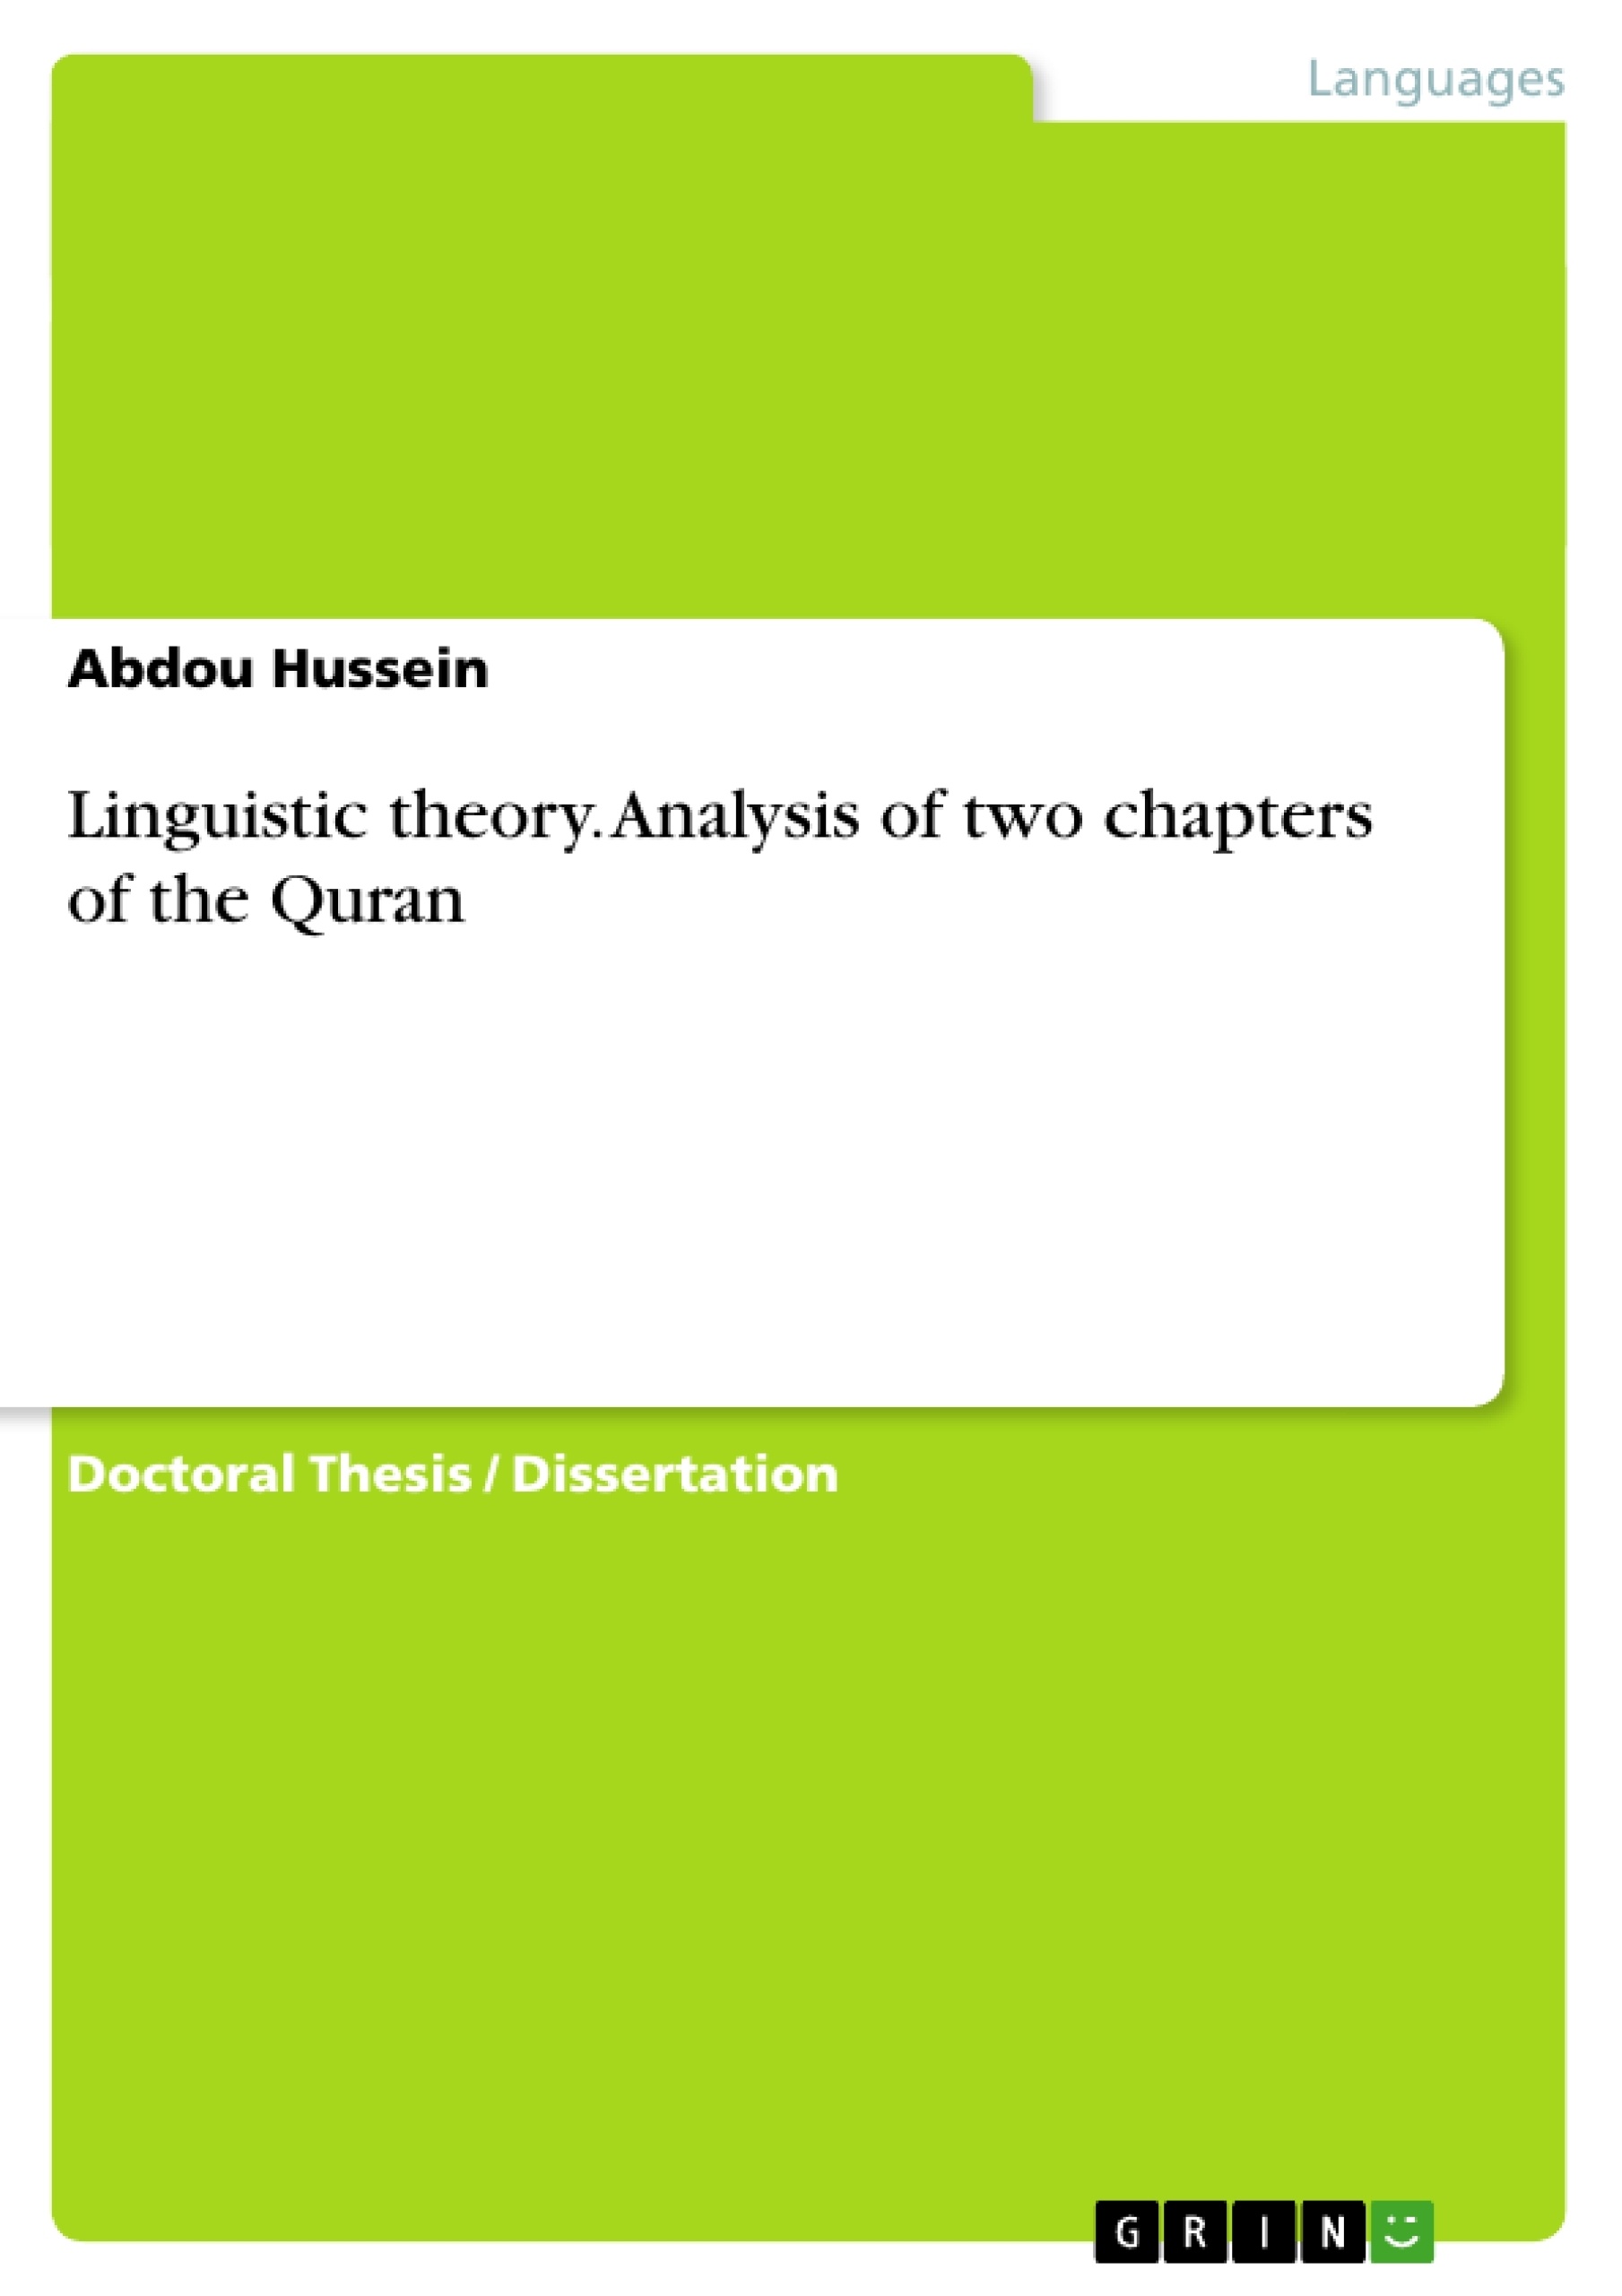 Título: Linguistic theory. Analysis of two chapters of the Quran